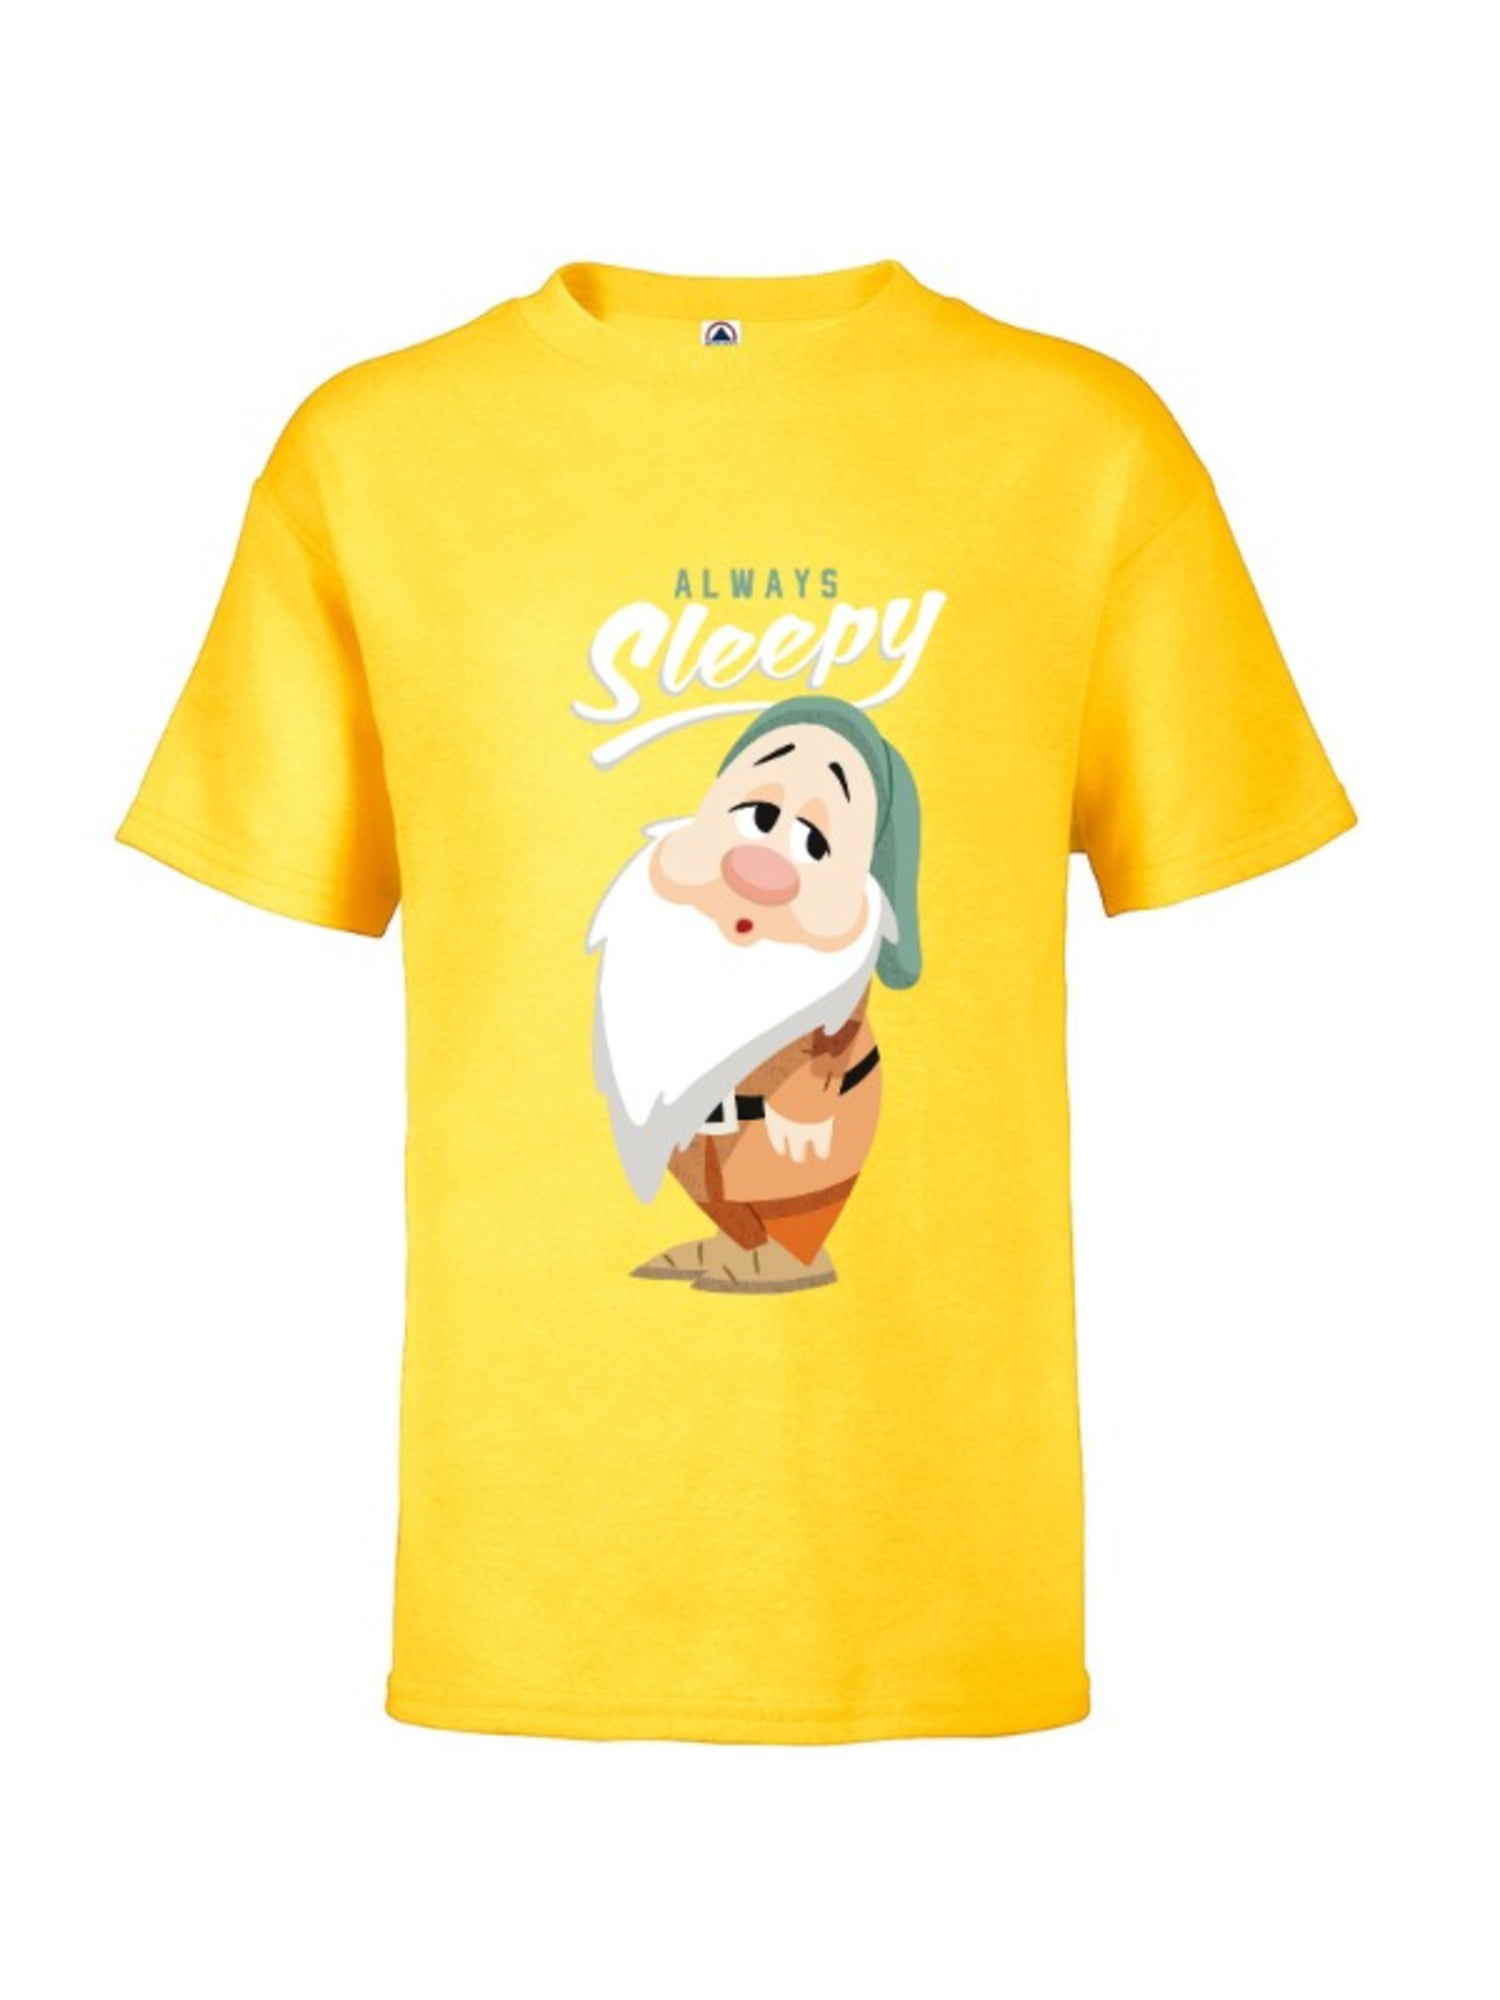 Quality Funny Disney 6 OUT OF 7 DWARFS ARE NOT HAPPY NEW T Shirt Clever 